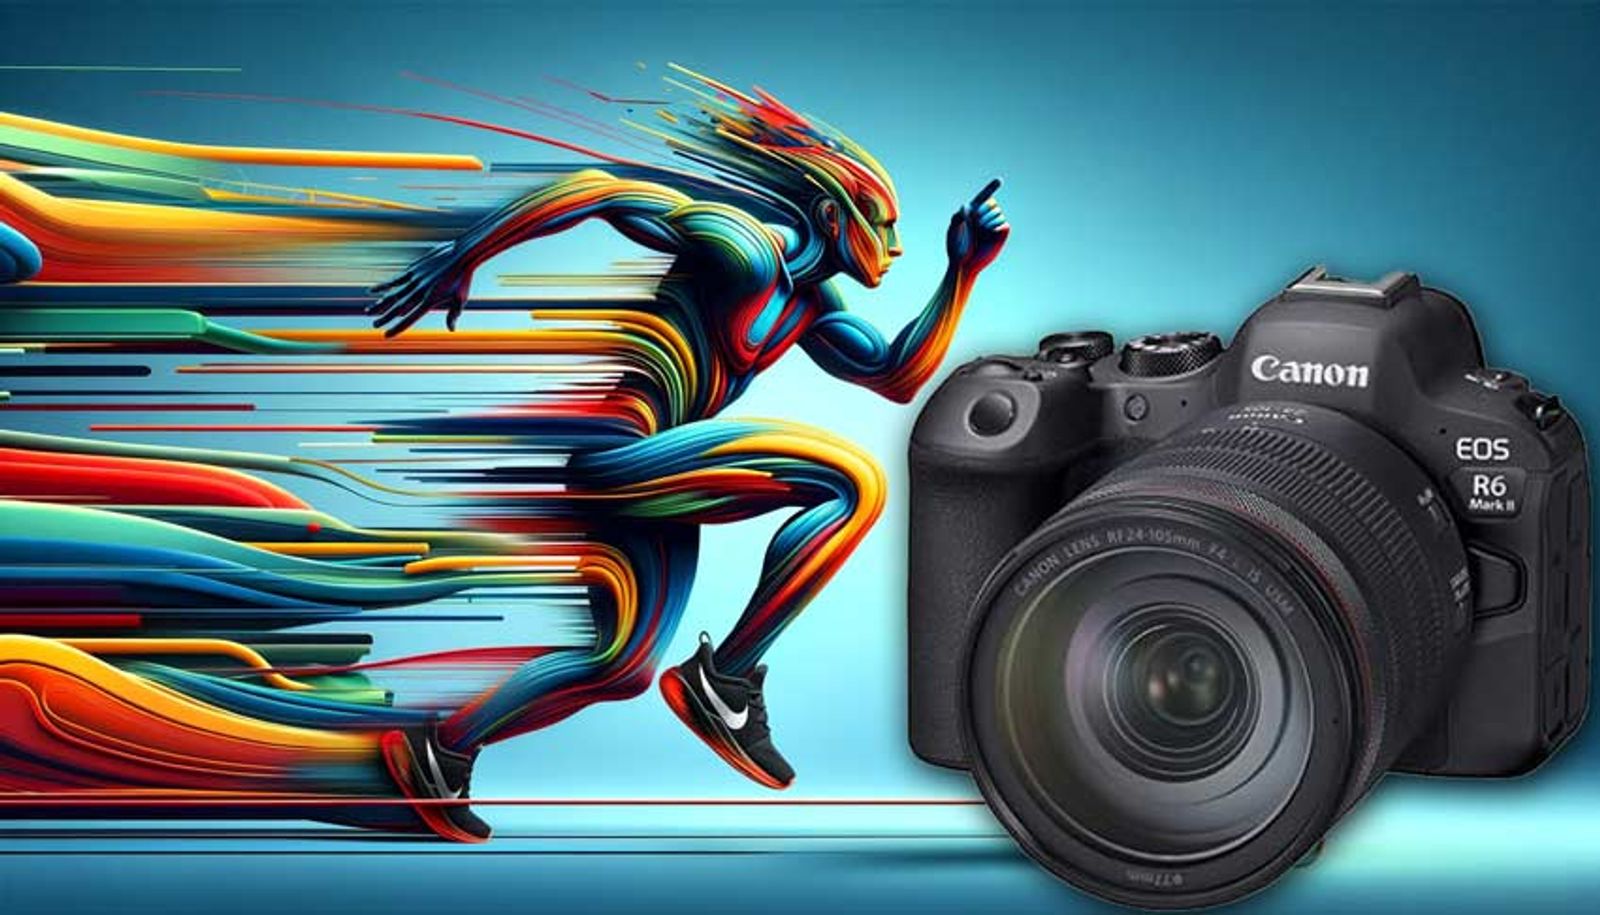 Canon EOS R6 for Sports Photography: Pros and Cons